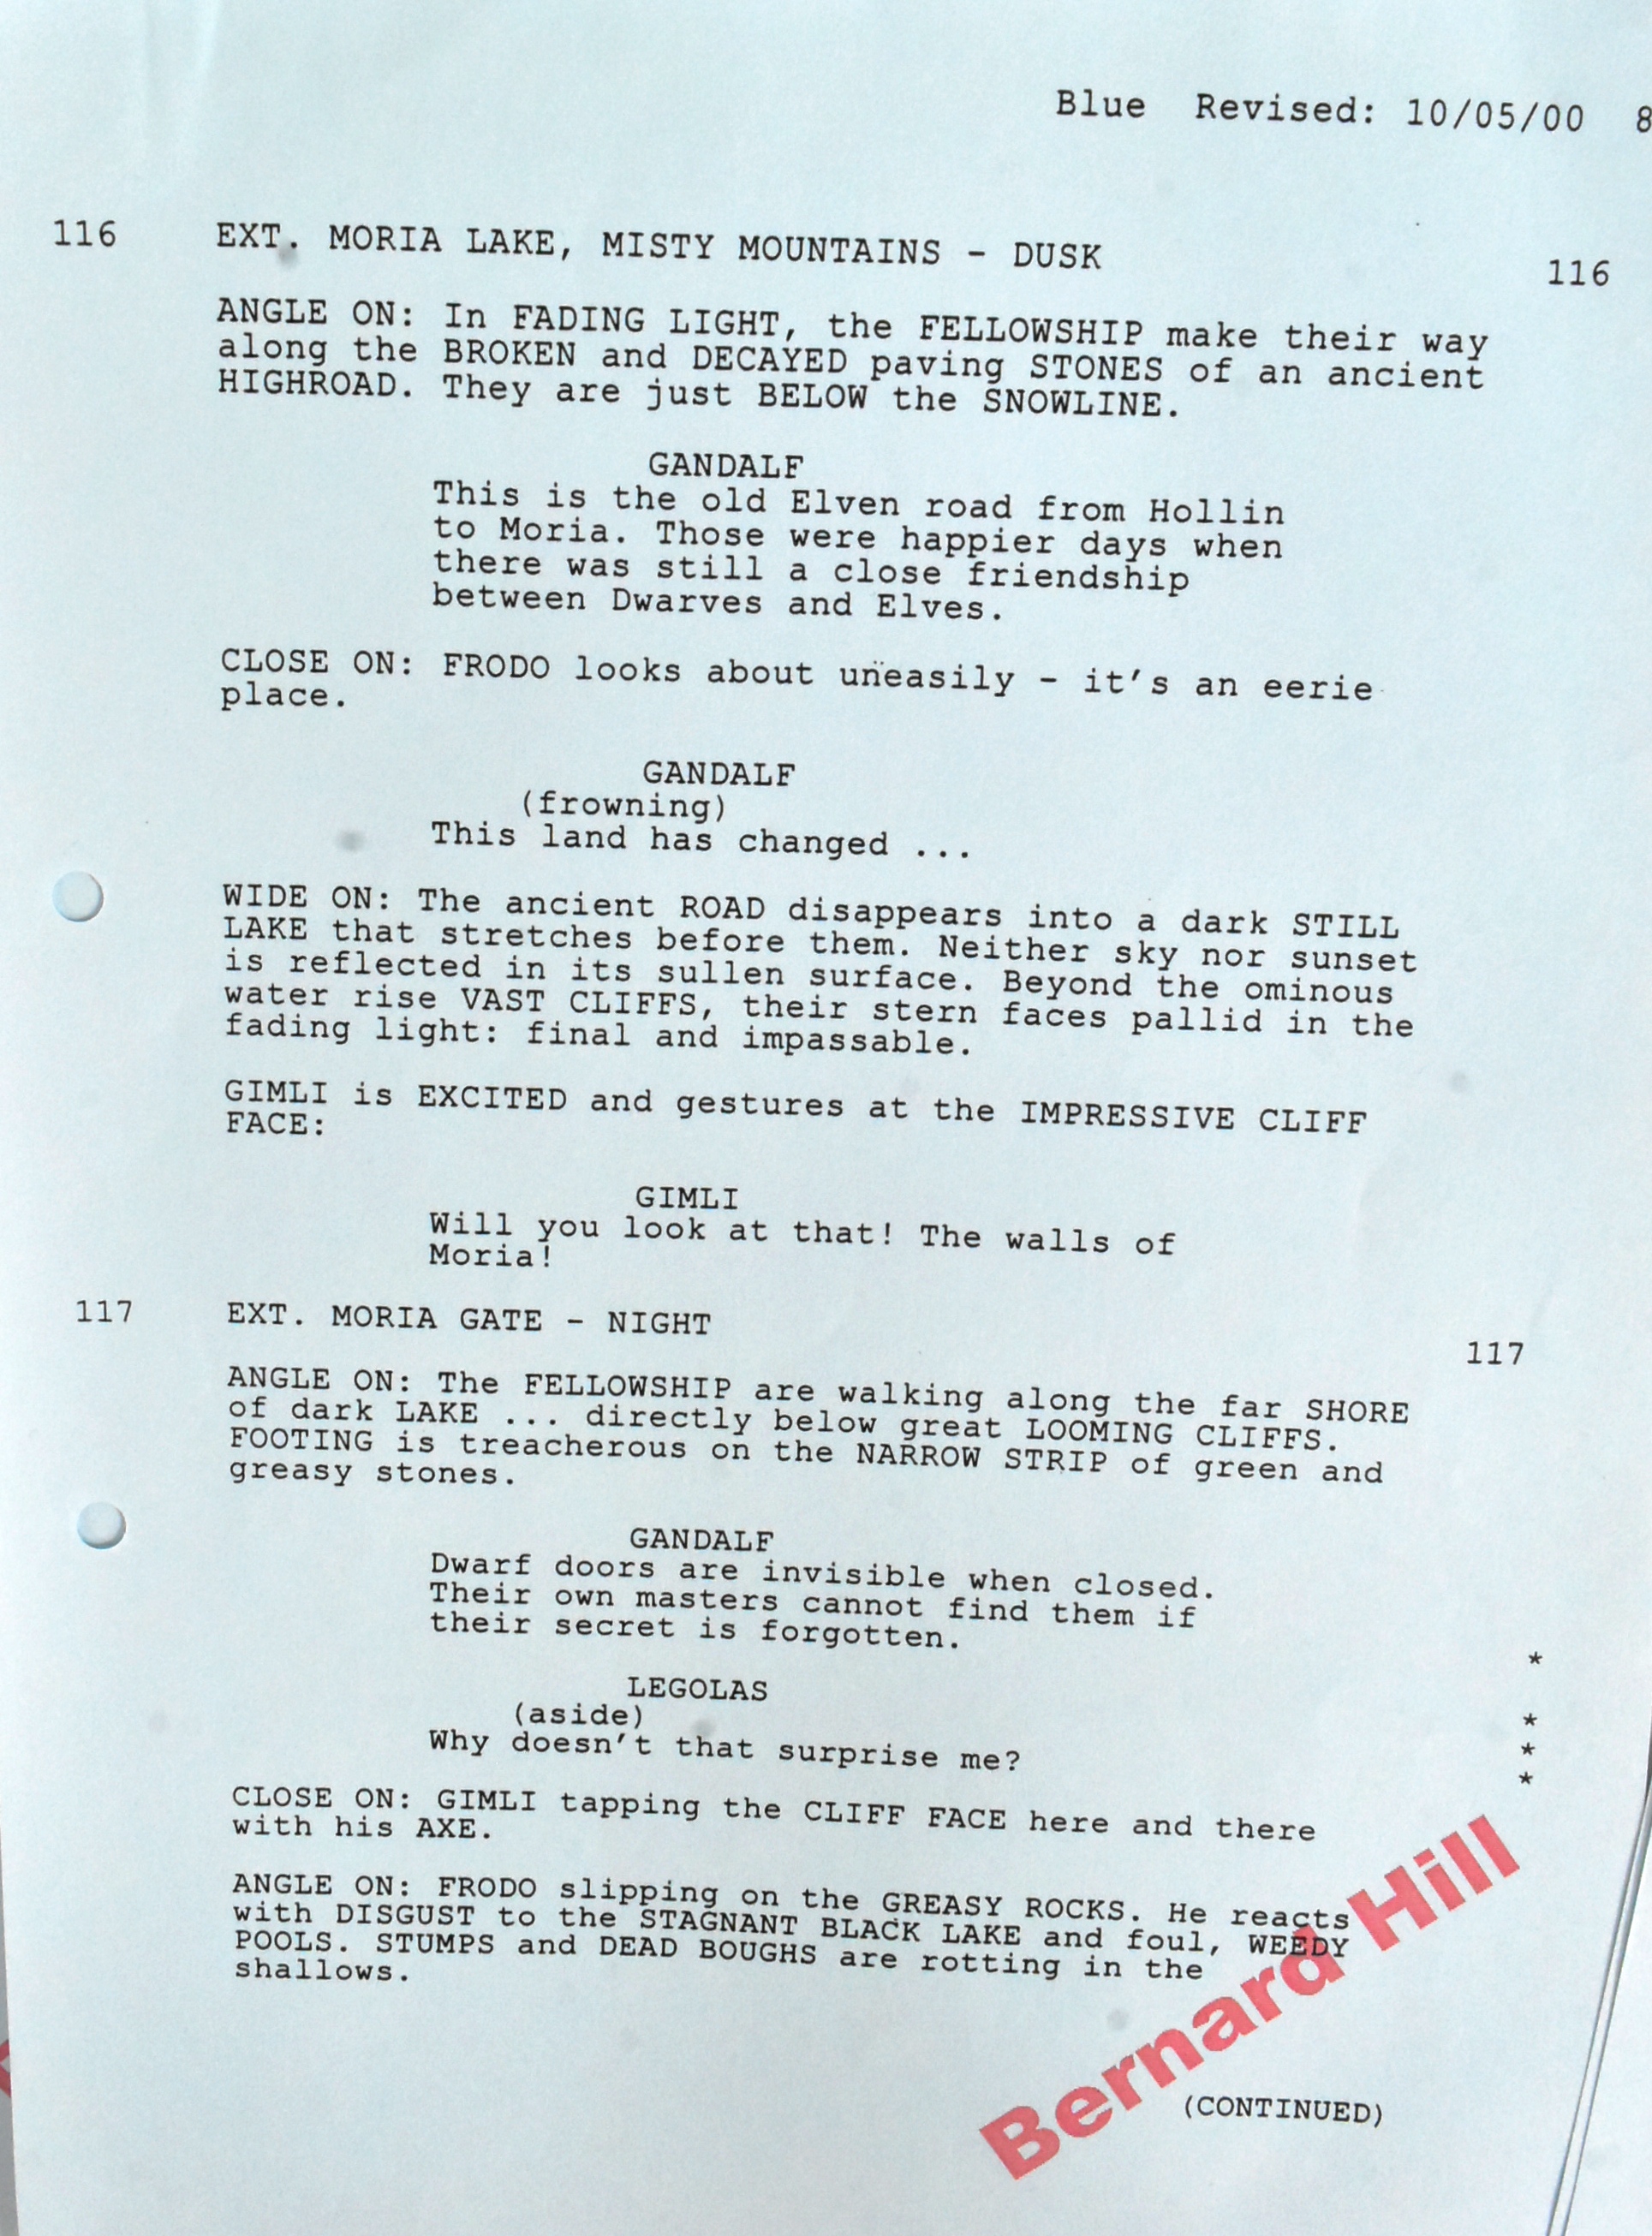 LORD OF THE RINGS - PRODUCTION SCRIPT EXTRACTS & PHOTO - Image 8 of 8